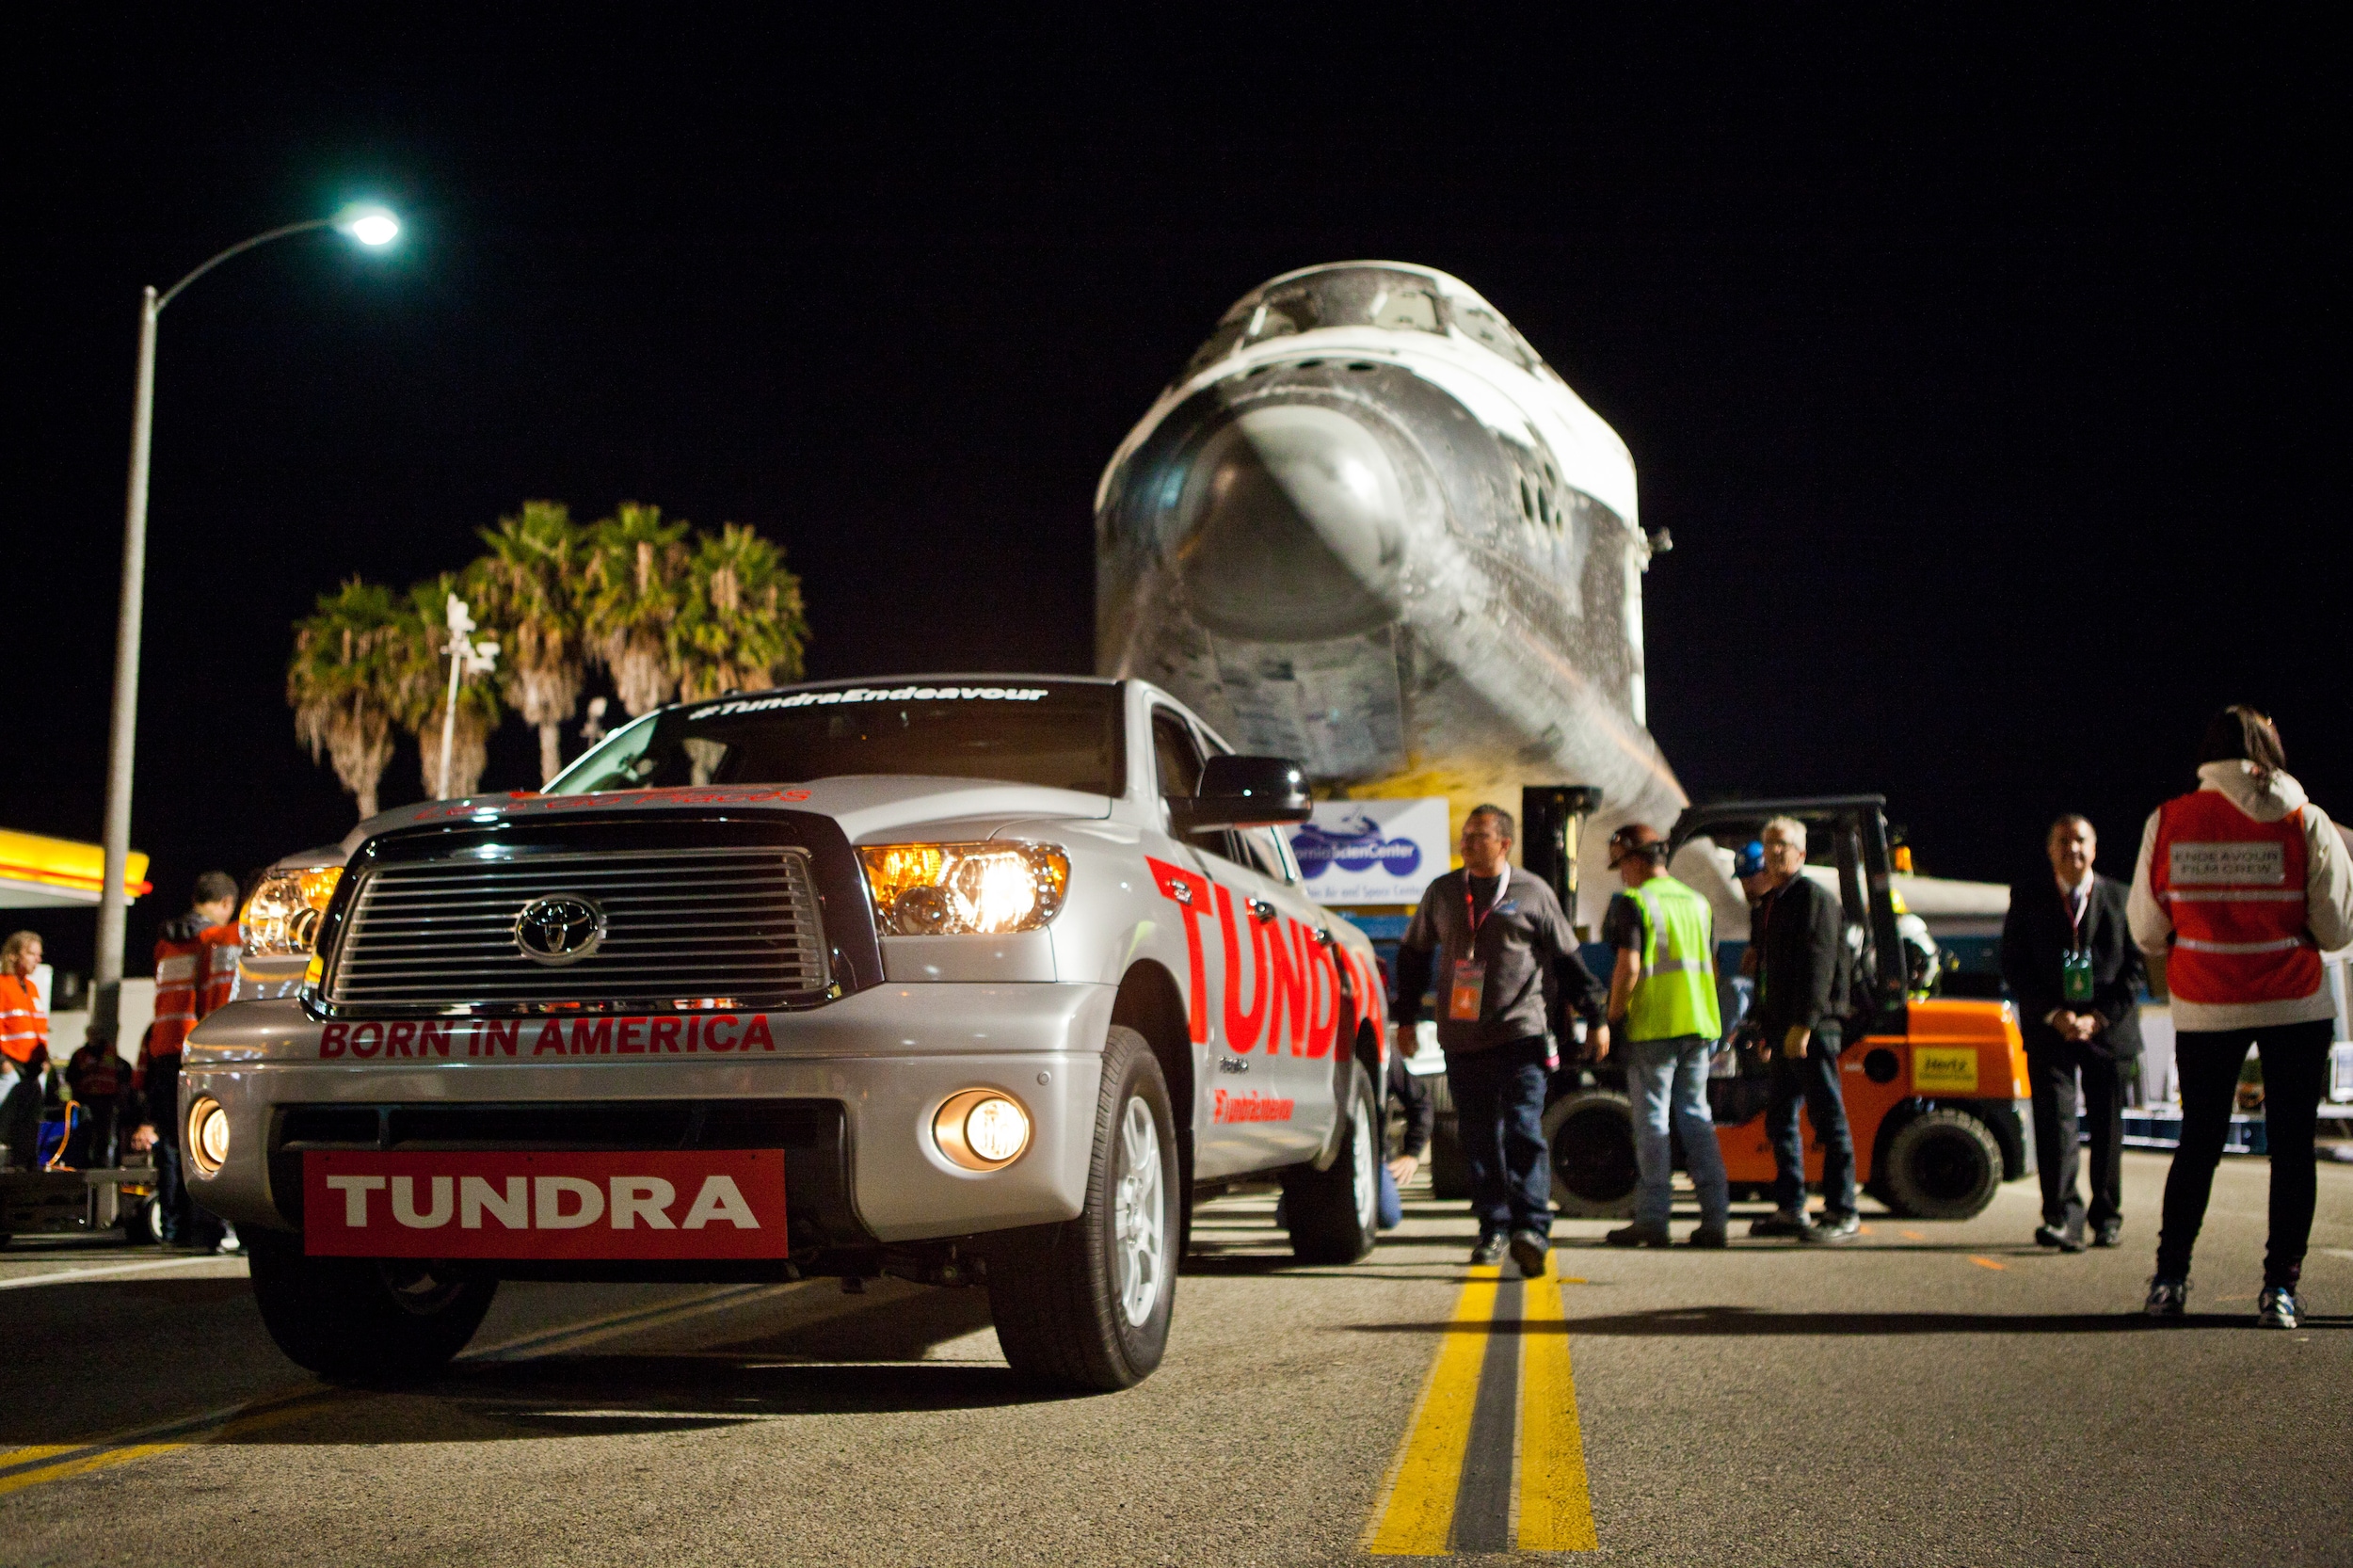 how did the toyota truck tow the space shuttle #3